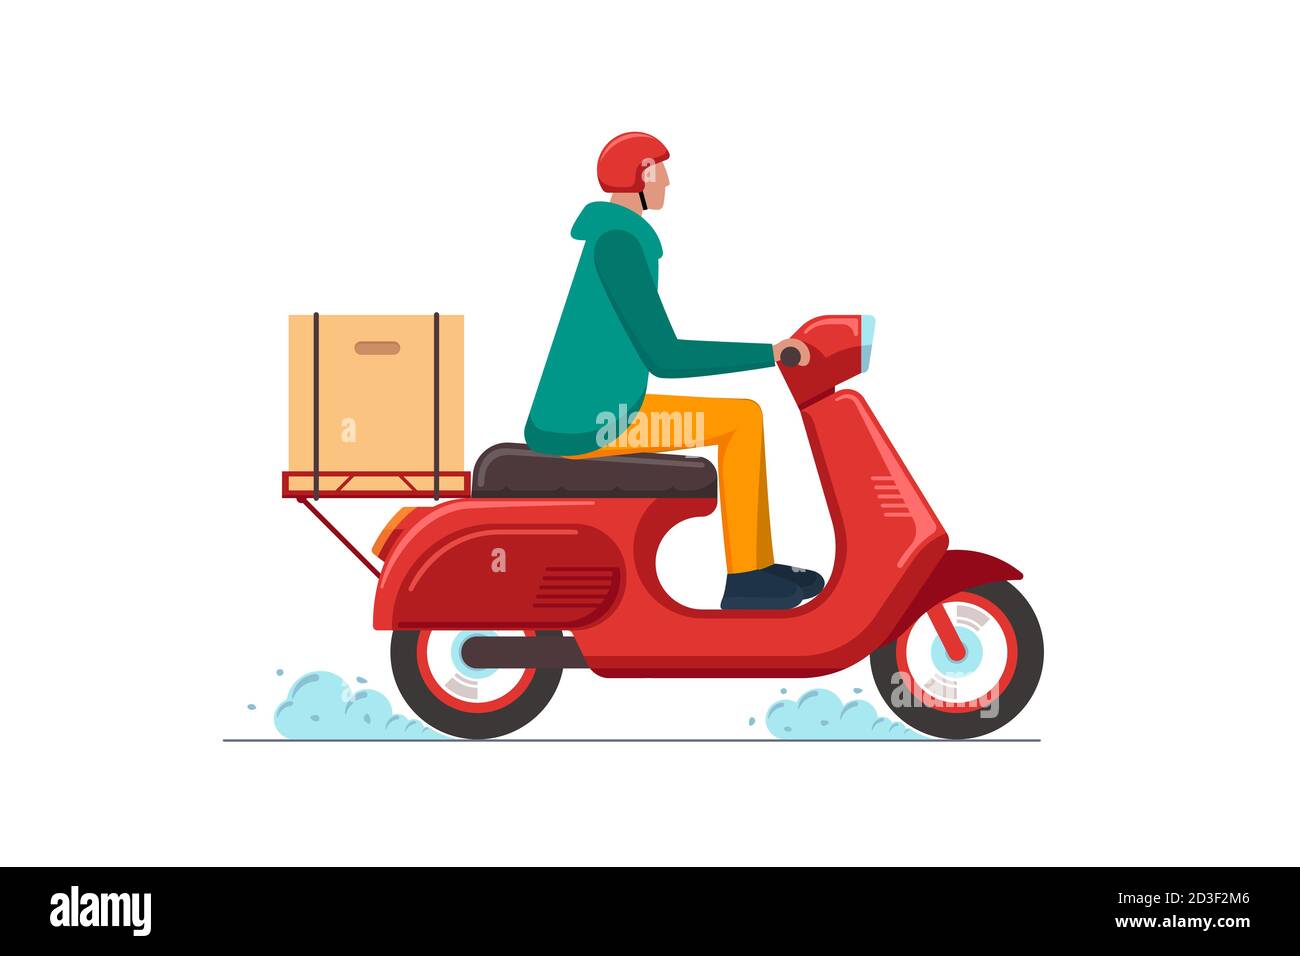 Express delivery service courier on scooter concept. Online fast logistic male on bicycle moped with orders parcel box. Goods or food carrying vector isolated flat illustration Stock Vector